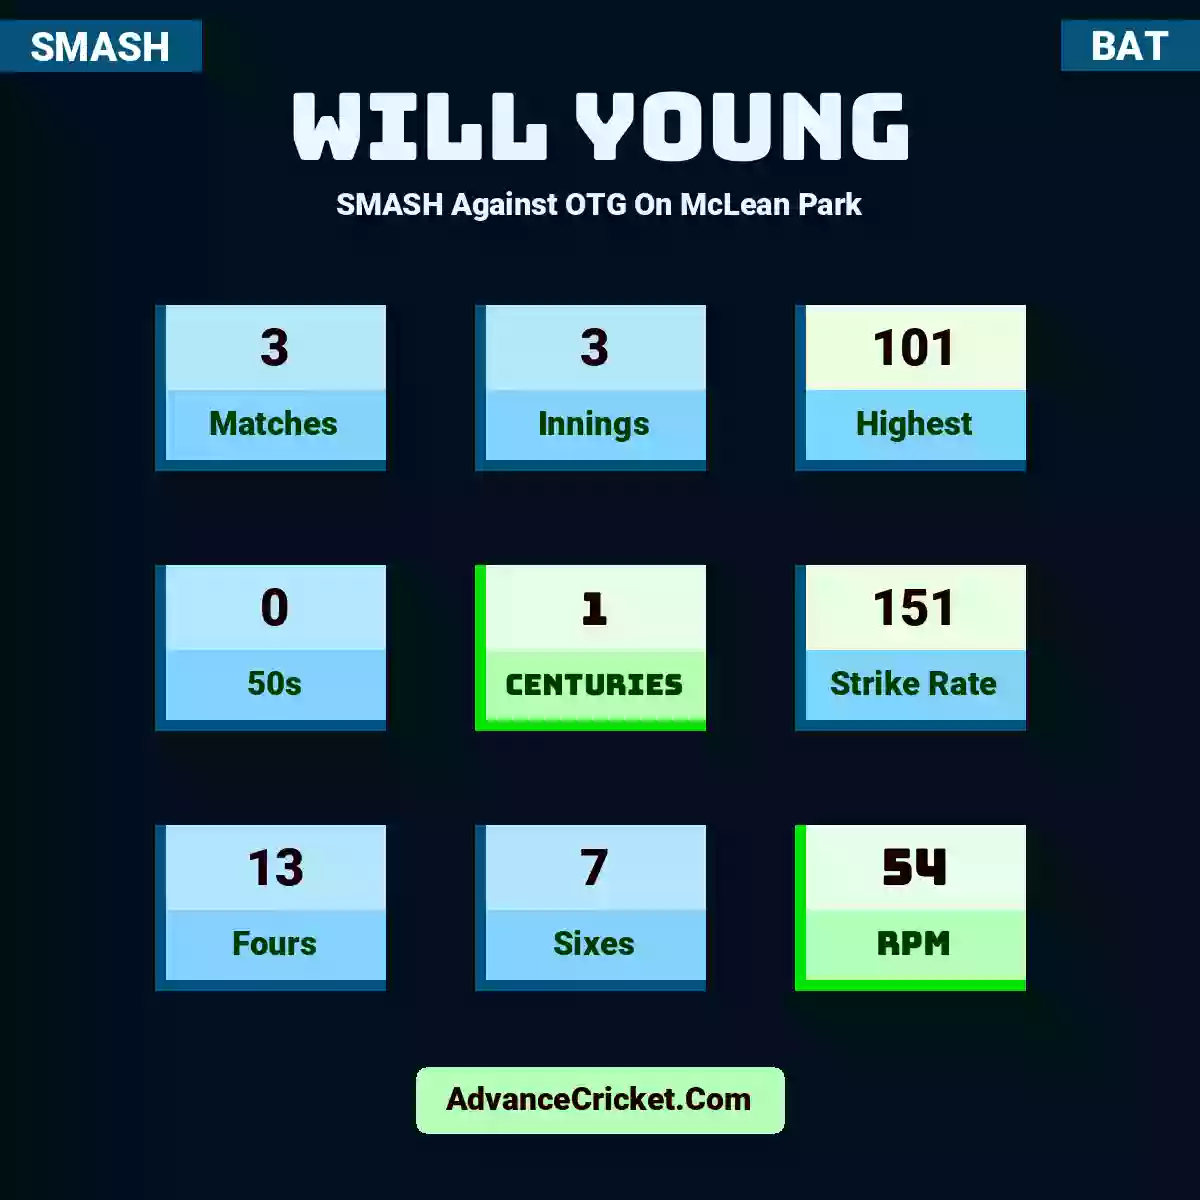 Will Young SMASH  Against OTG On McLean Park, Will Young played 3 matches, scored 101 runs as highest, 0 half-centuries, and 1 centuries, with a strike rate of 151. W.Young hit 13 fours and 7 sixes, with an RPM of 54.